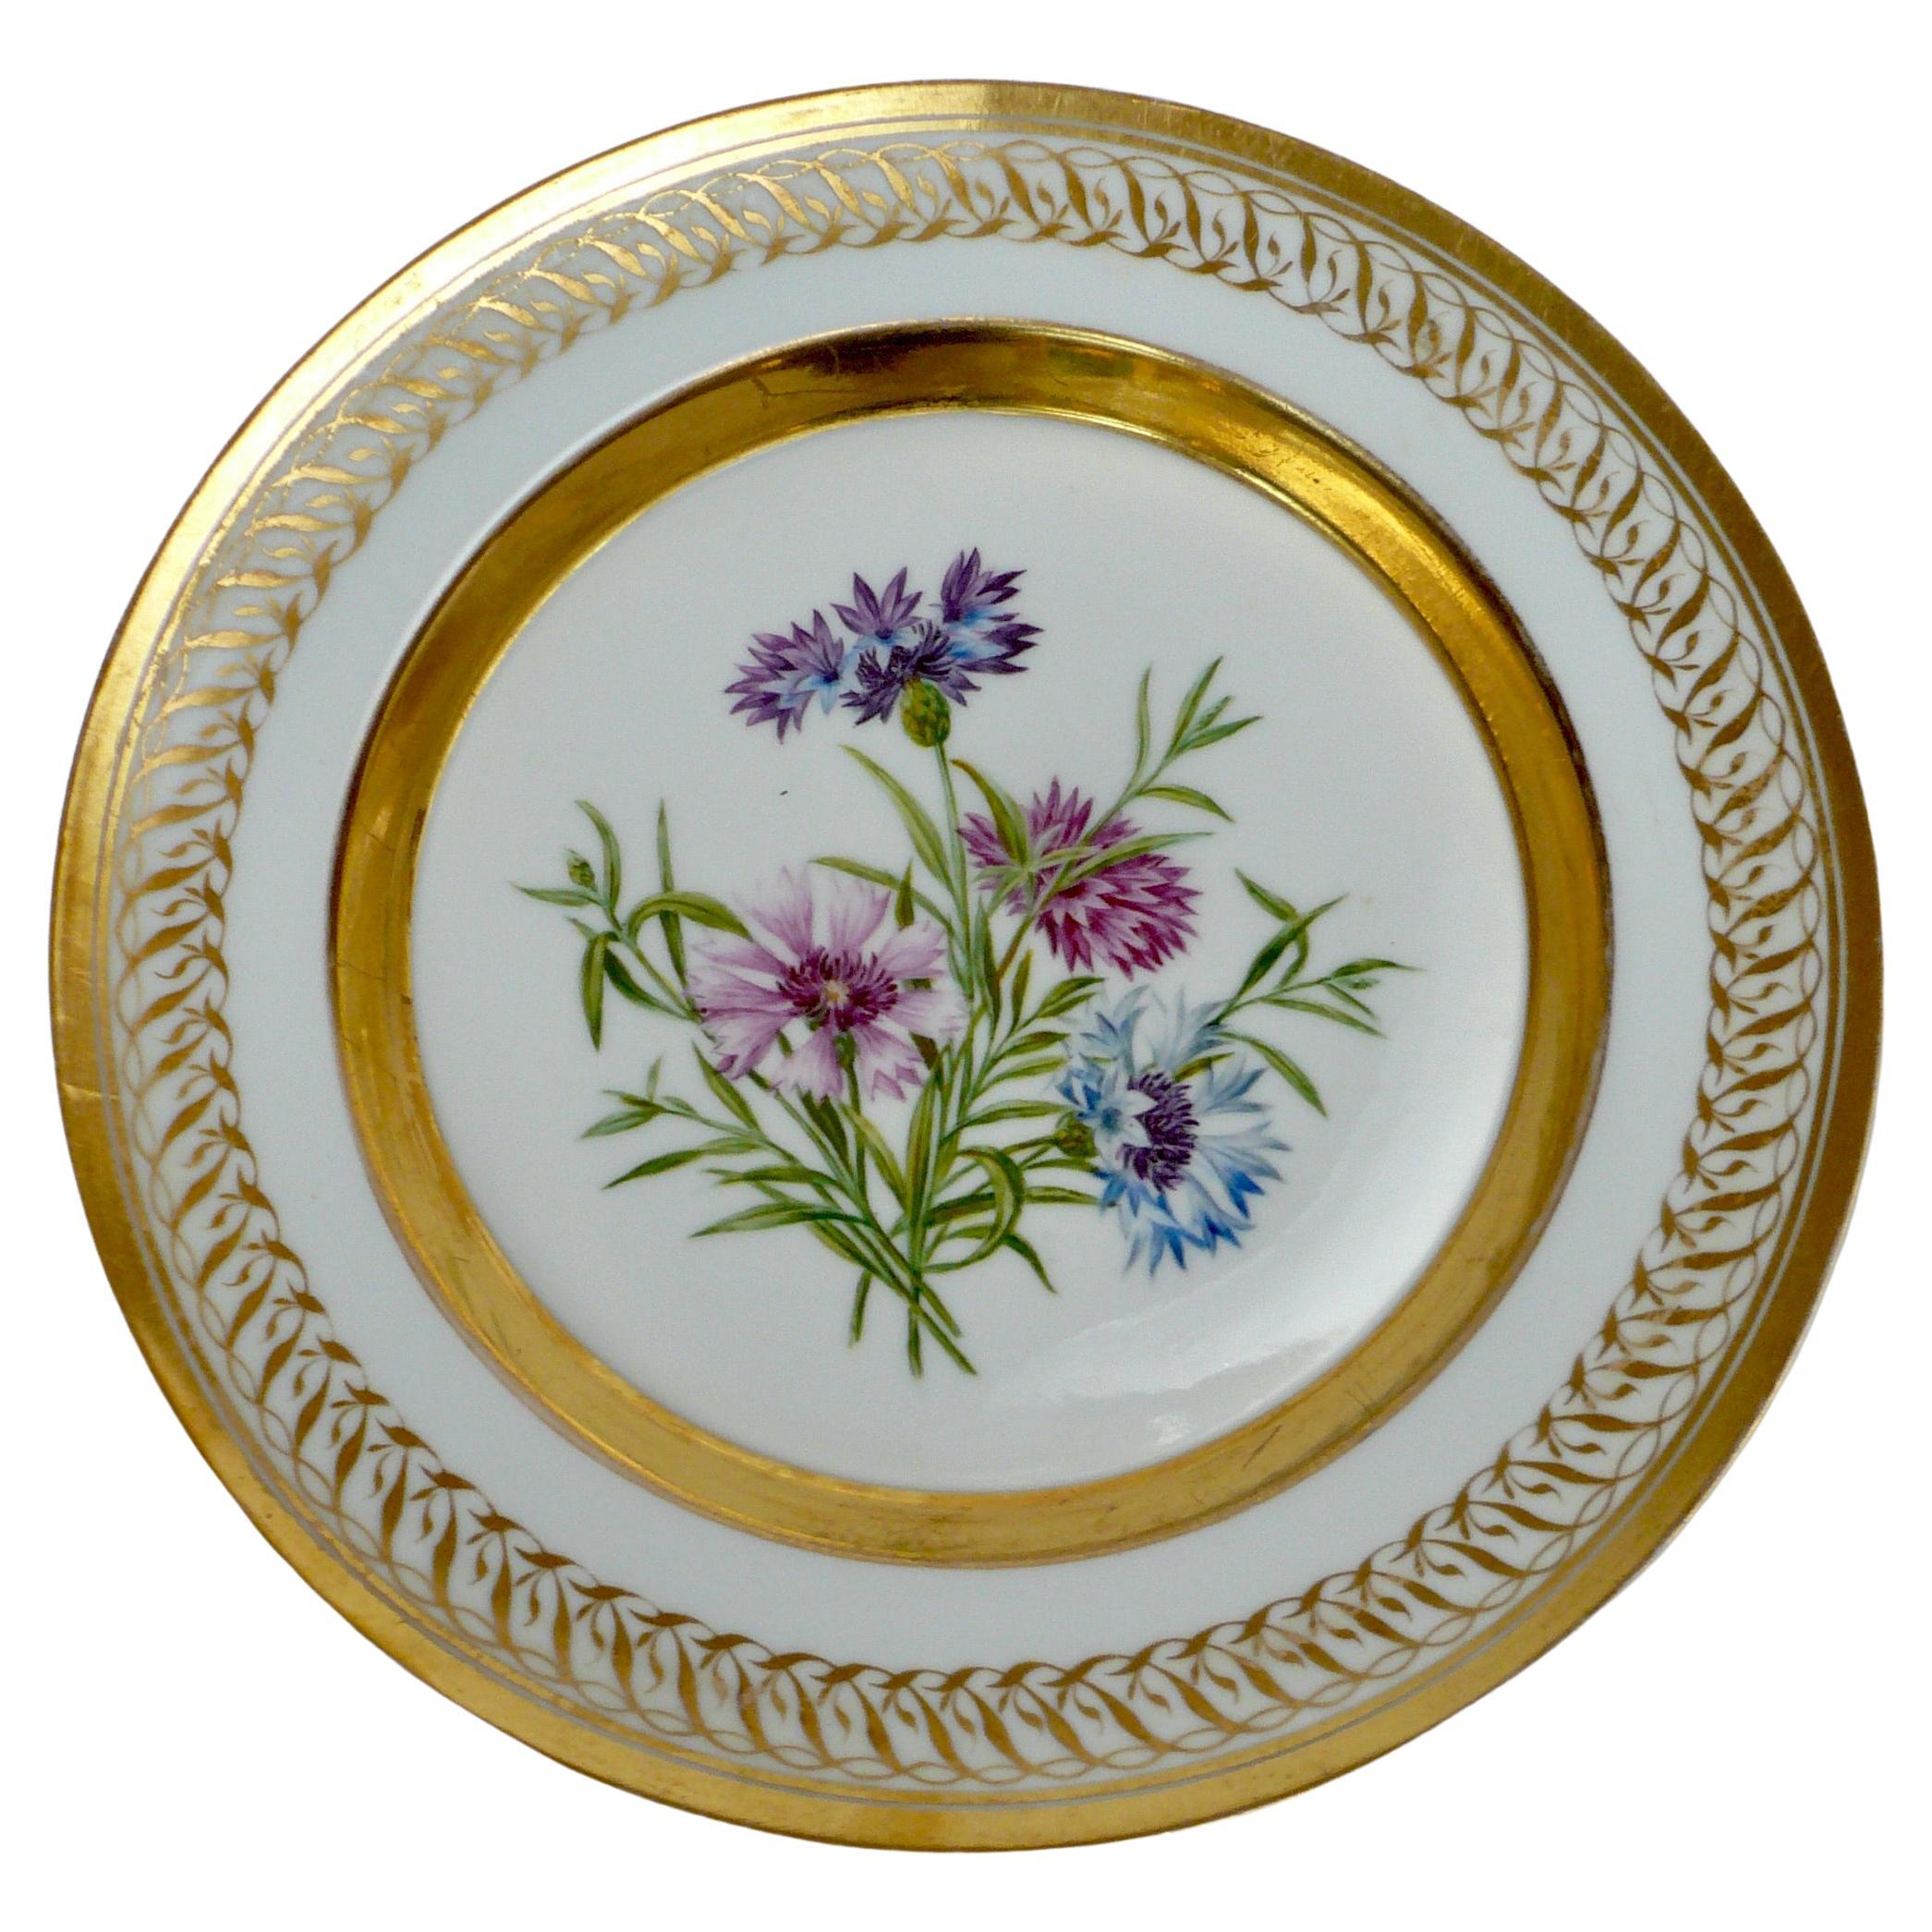 Berlin Porcelain Botanically Decorated Plate